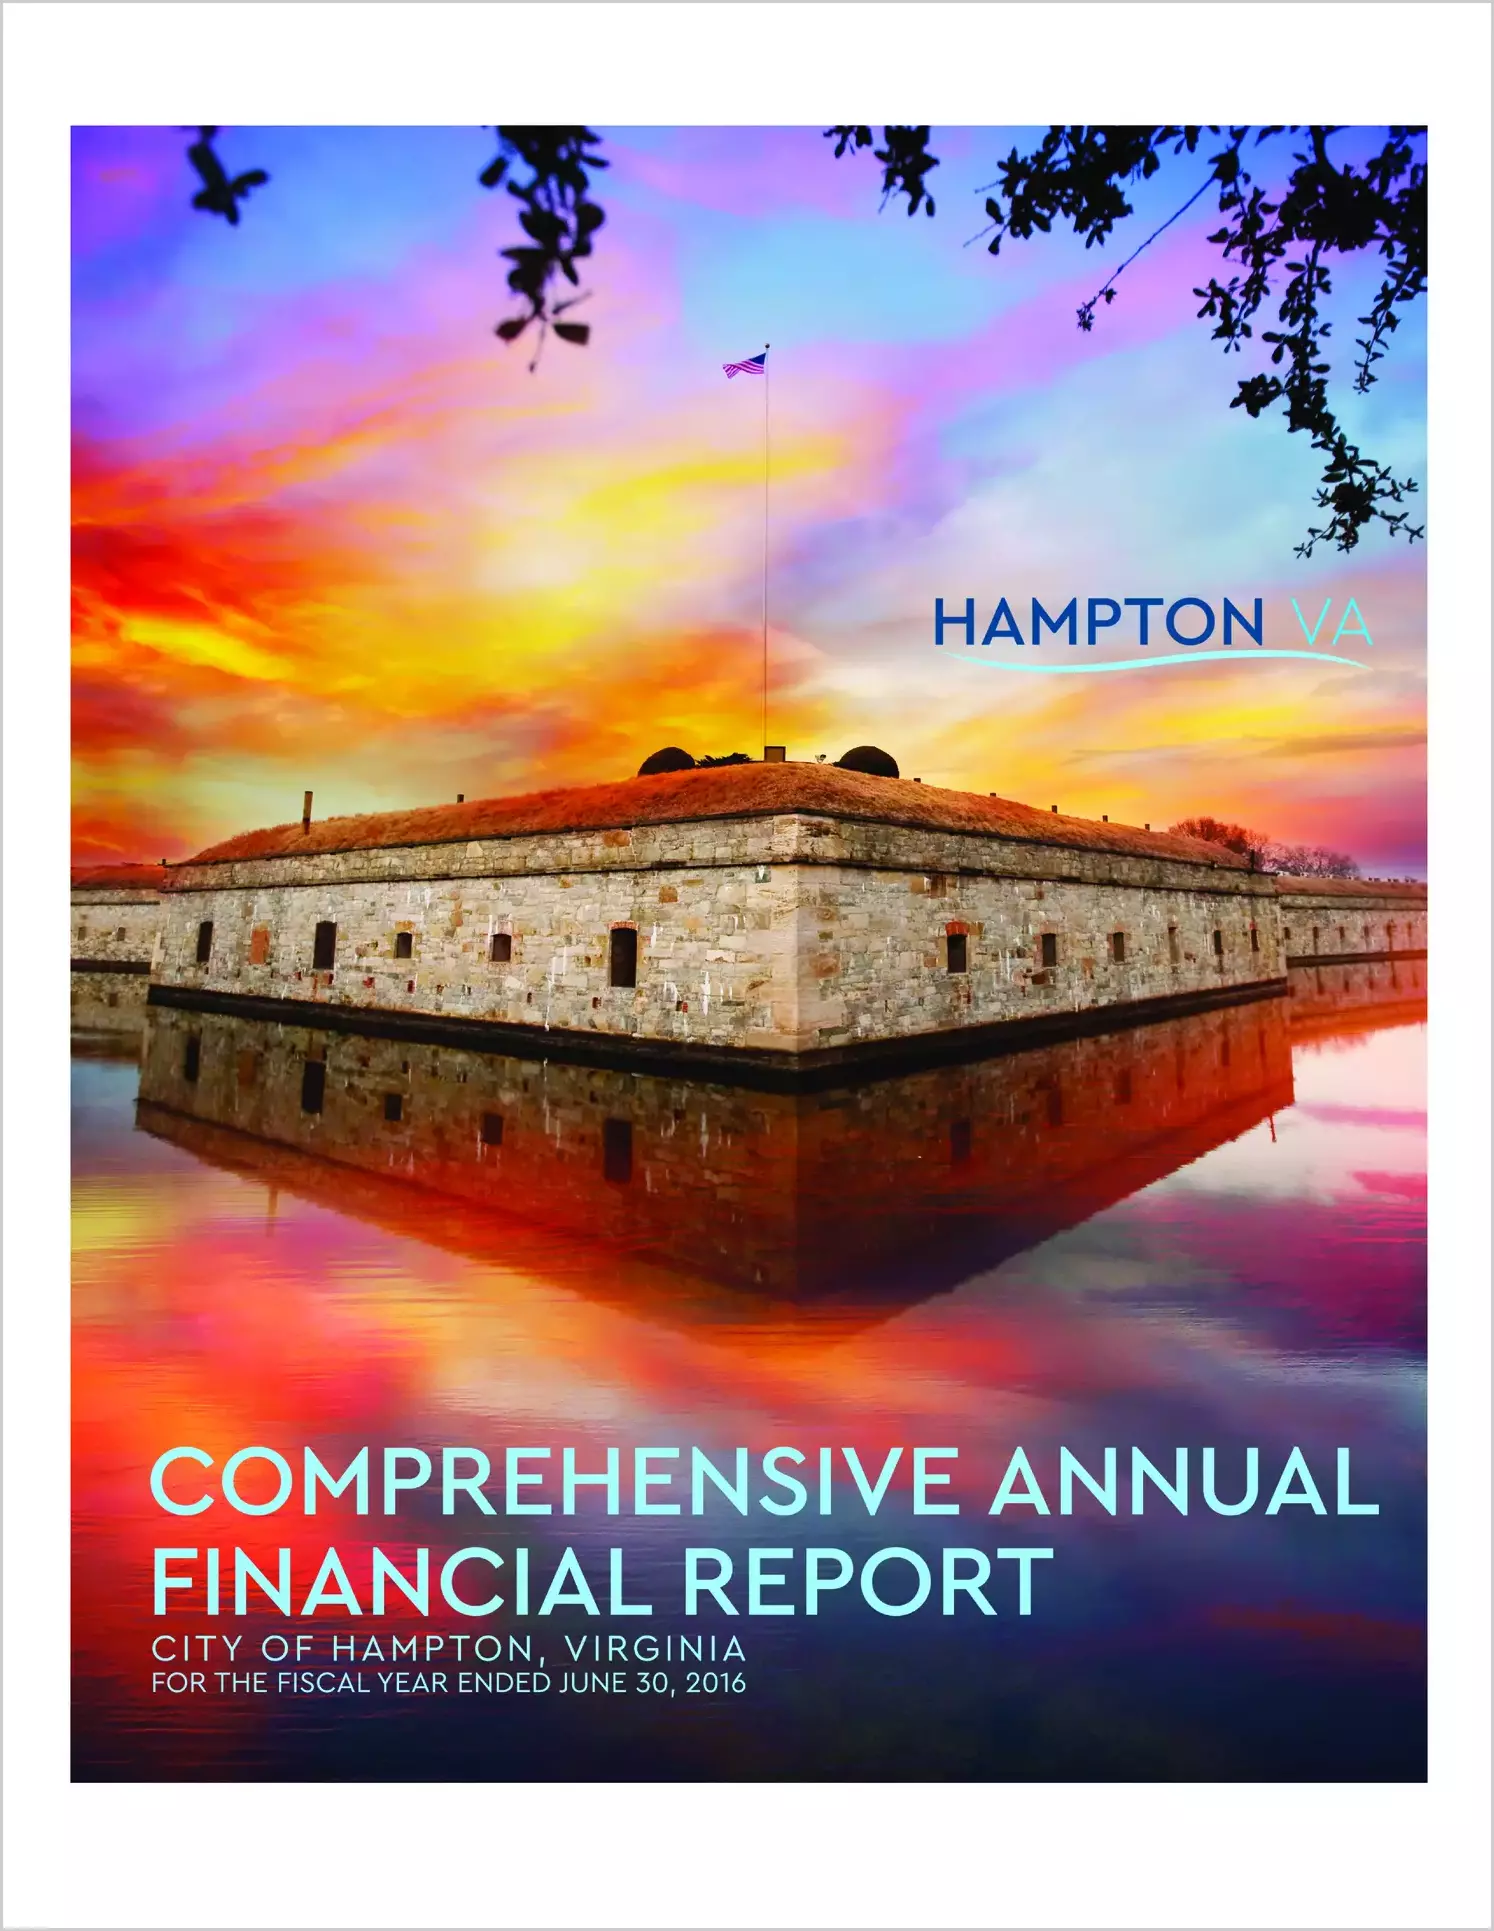 2016 Annual Financial Report for City of Hampton